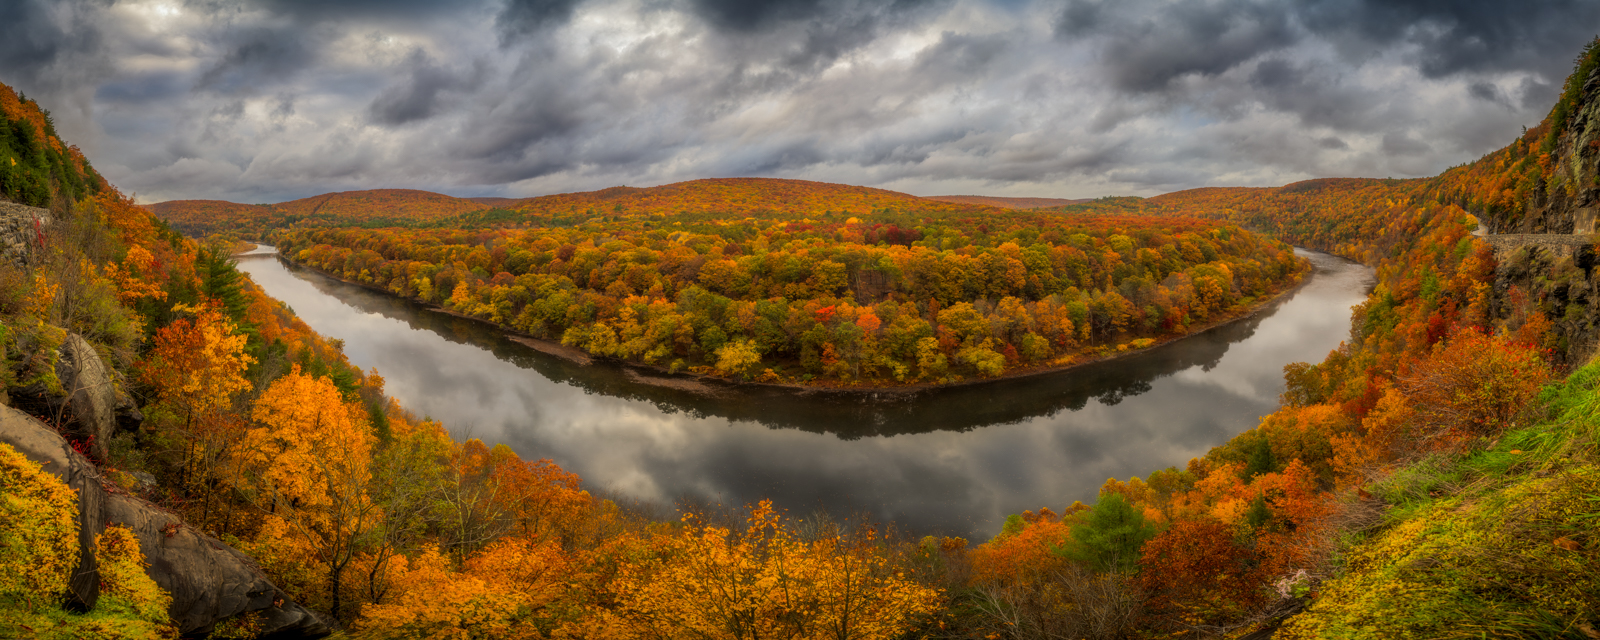 In this serene snapshot of a New England fall, the river bends in a graceful arc, cradled by a kaleidoscope of trees in their...